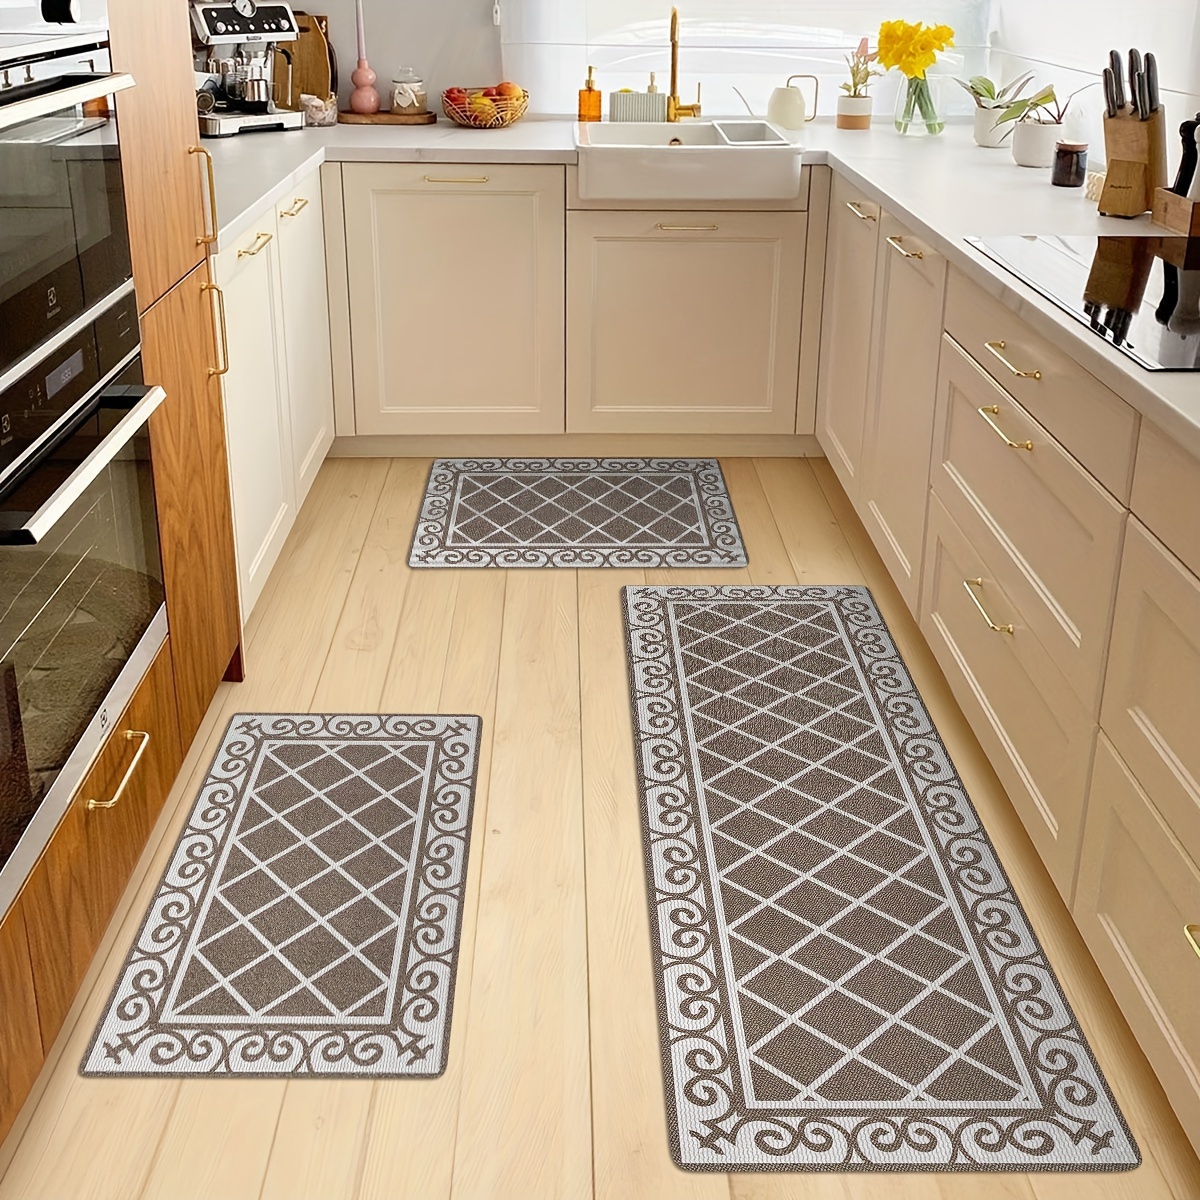 

1pc Retro Printed Kitchen Carpet, Non-slip Anti-oil Waterproof Carpet, Anti-fouling Carpet, For The Kitchen Living Room Laundry Bathroom Home Decoration, Room Decoration